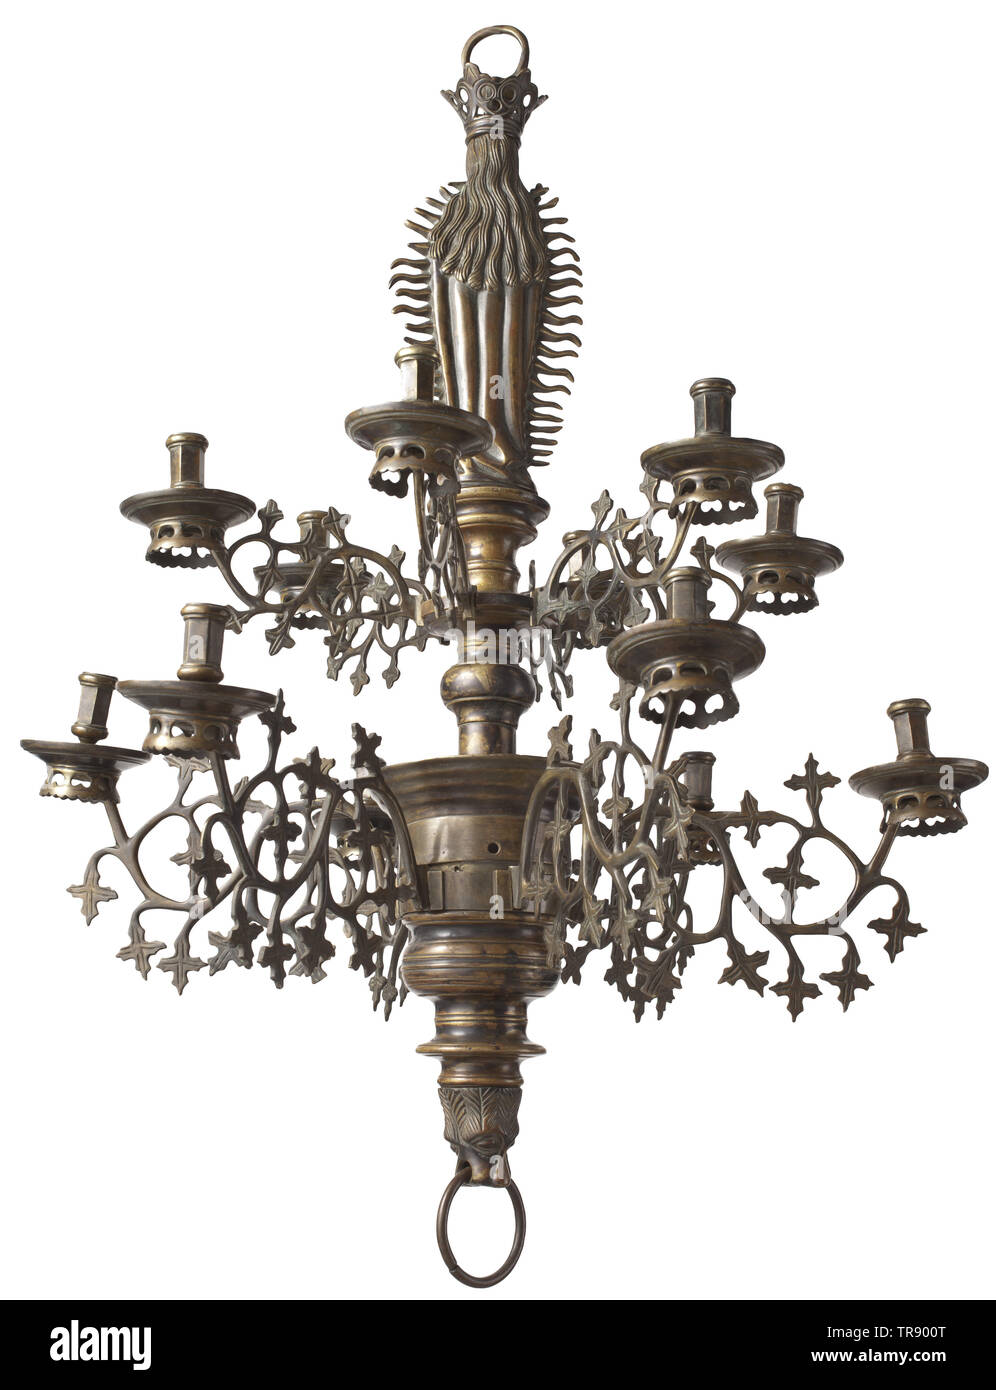 A Flemish twelve-branch Virgin Mary chandelier Heavy bronze chandelier with two rows of candle holders surmounted by the standing, crowned Virgin Mary as Queen of Heaven, holding the sceptre in her right hand and surrounded by a crown of flames, the lower end terminating in a lion's head. Demountable version, the candle holders separately removable. Height 78 cm. historic, historical, handicrafts, handcraft, craft, object, objects, stills, clipping, clippings, cut out, cut-out, cut-outs, Additional-Rights-Clearance-Info-Not-Available Stock Photo